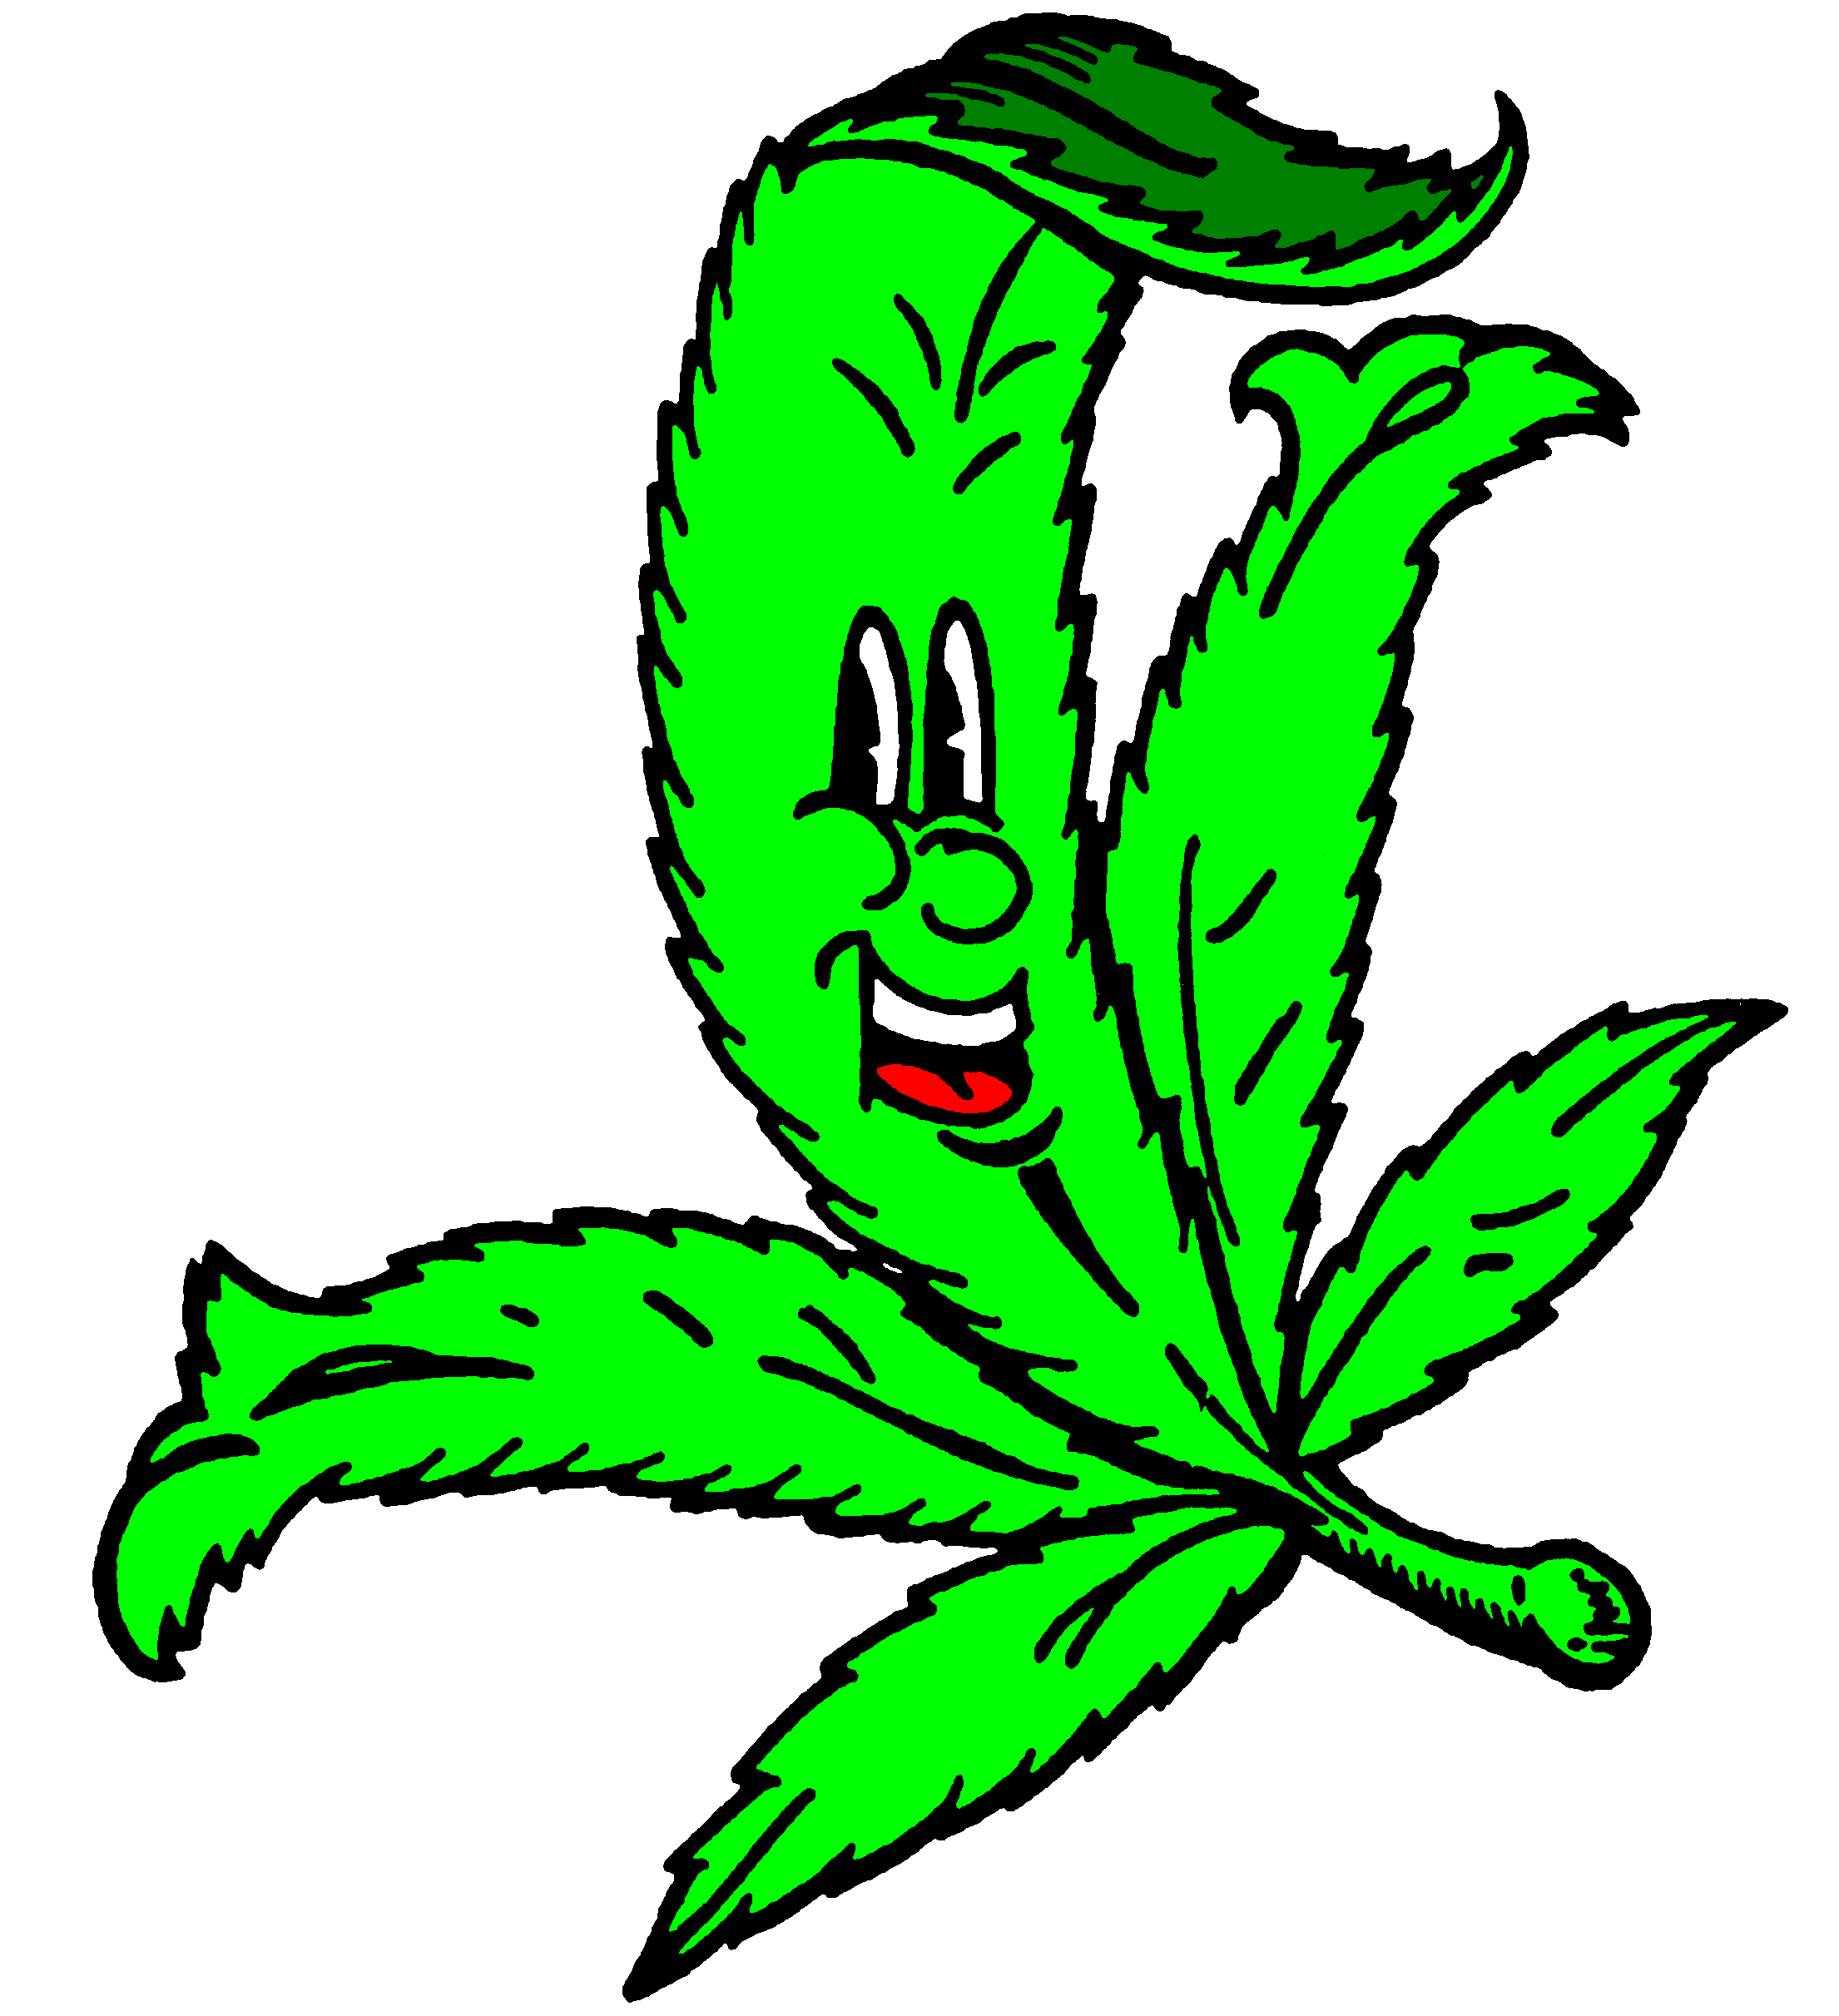 R U NORML? DO U WANNA B?  Folks are being NORML in Eugene, Oregon, and all across America and The World.  Act NORML, Join Up and otherwise Help Out Ending The War